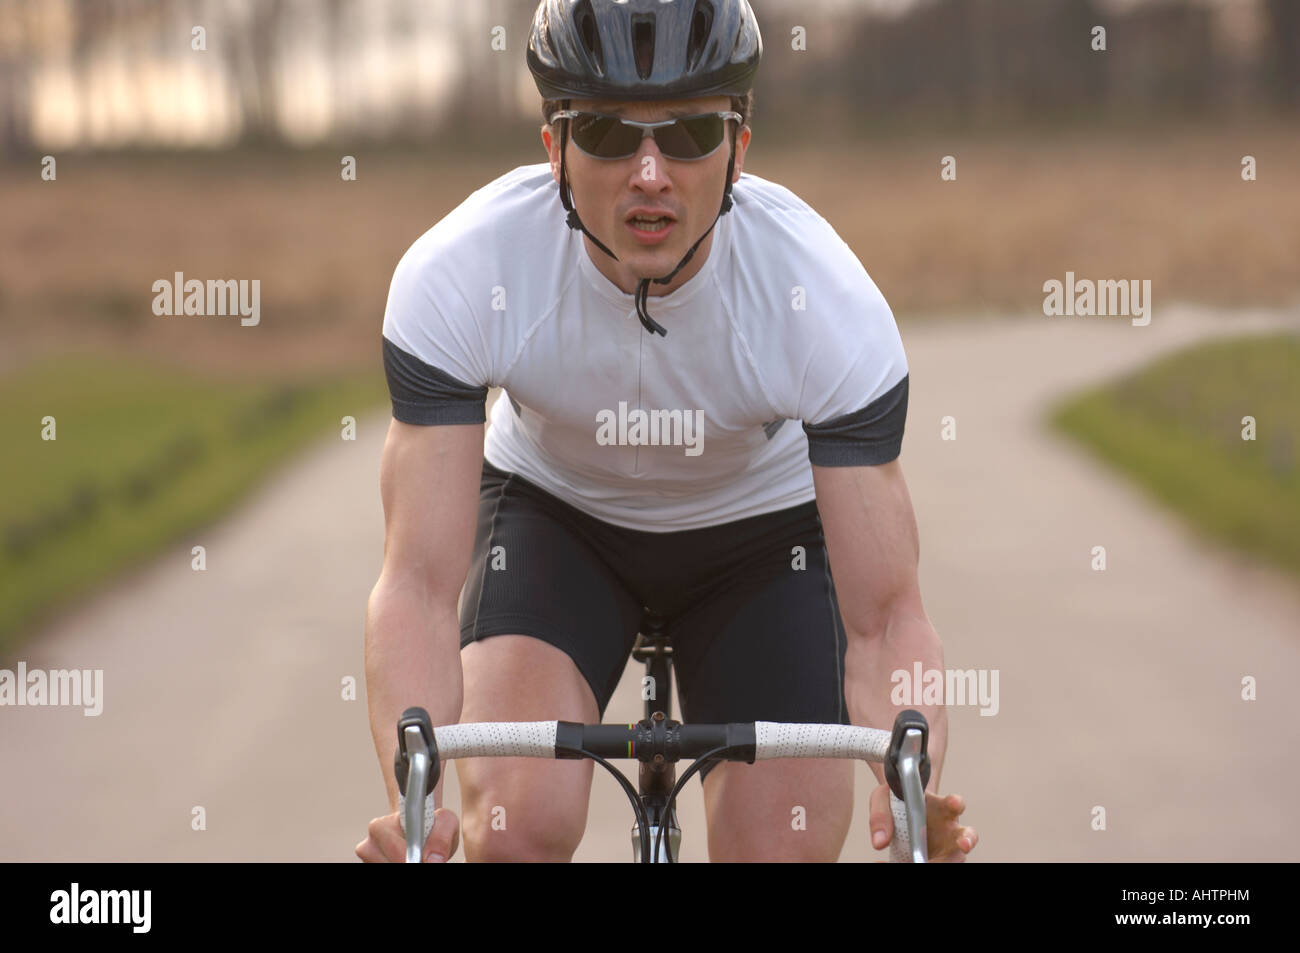 Man cycling in park Stock Photo